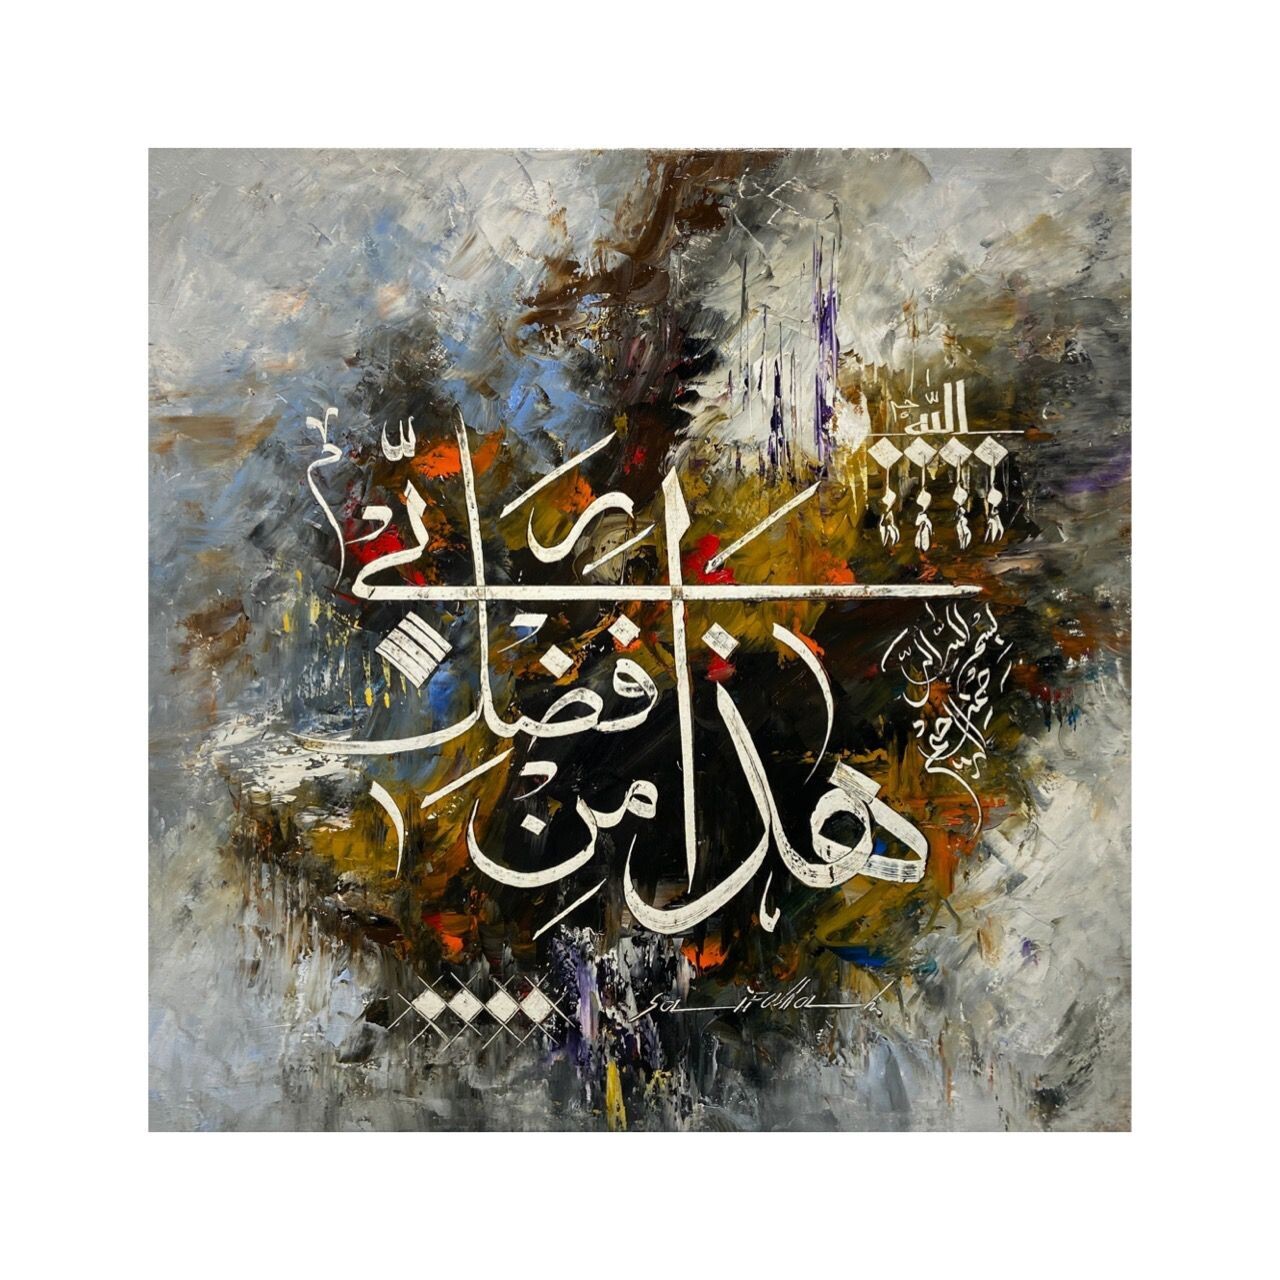 Quranic ayat - This is from the favor of my Lord (40:27) - Original hand engraved knife calligraphy painting